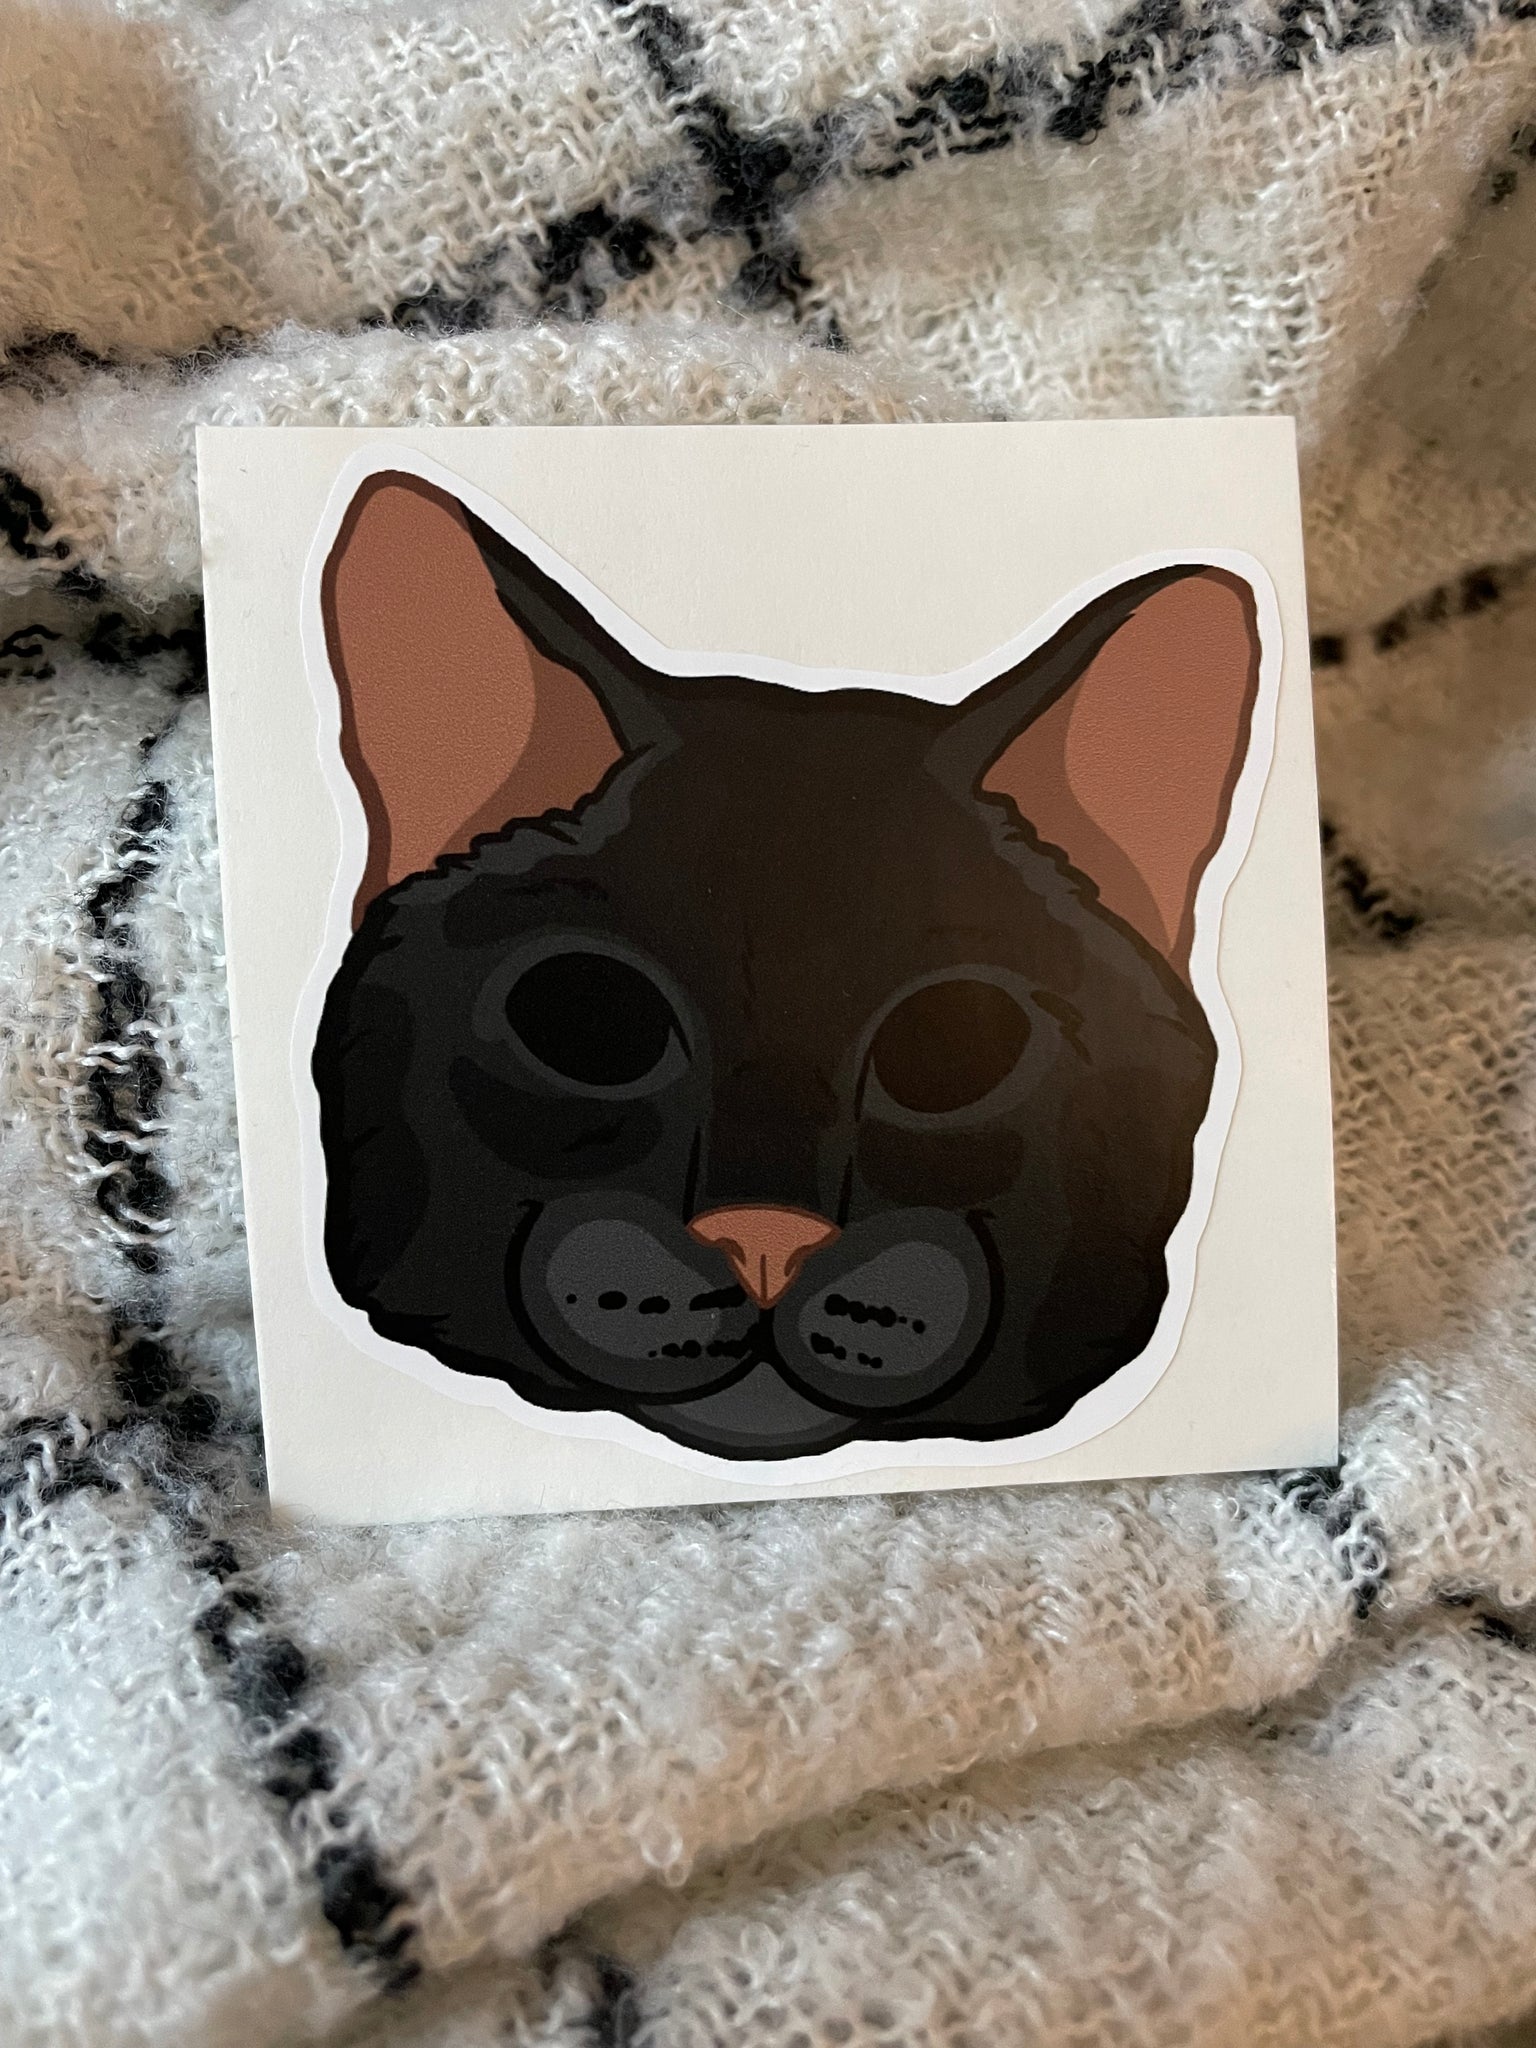 Little Meepers' Holographic Vinyl Stickers Silly Cat Stickers 